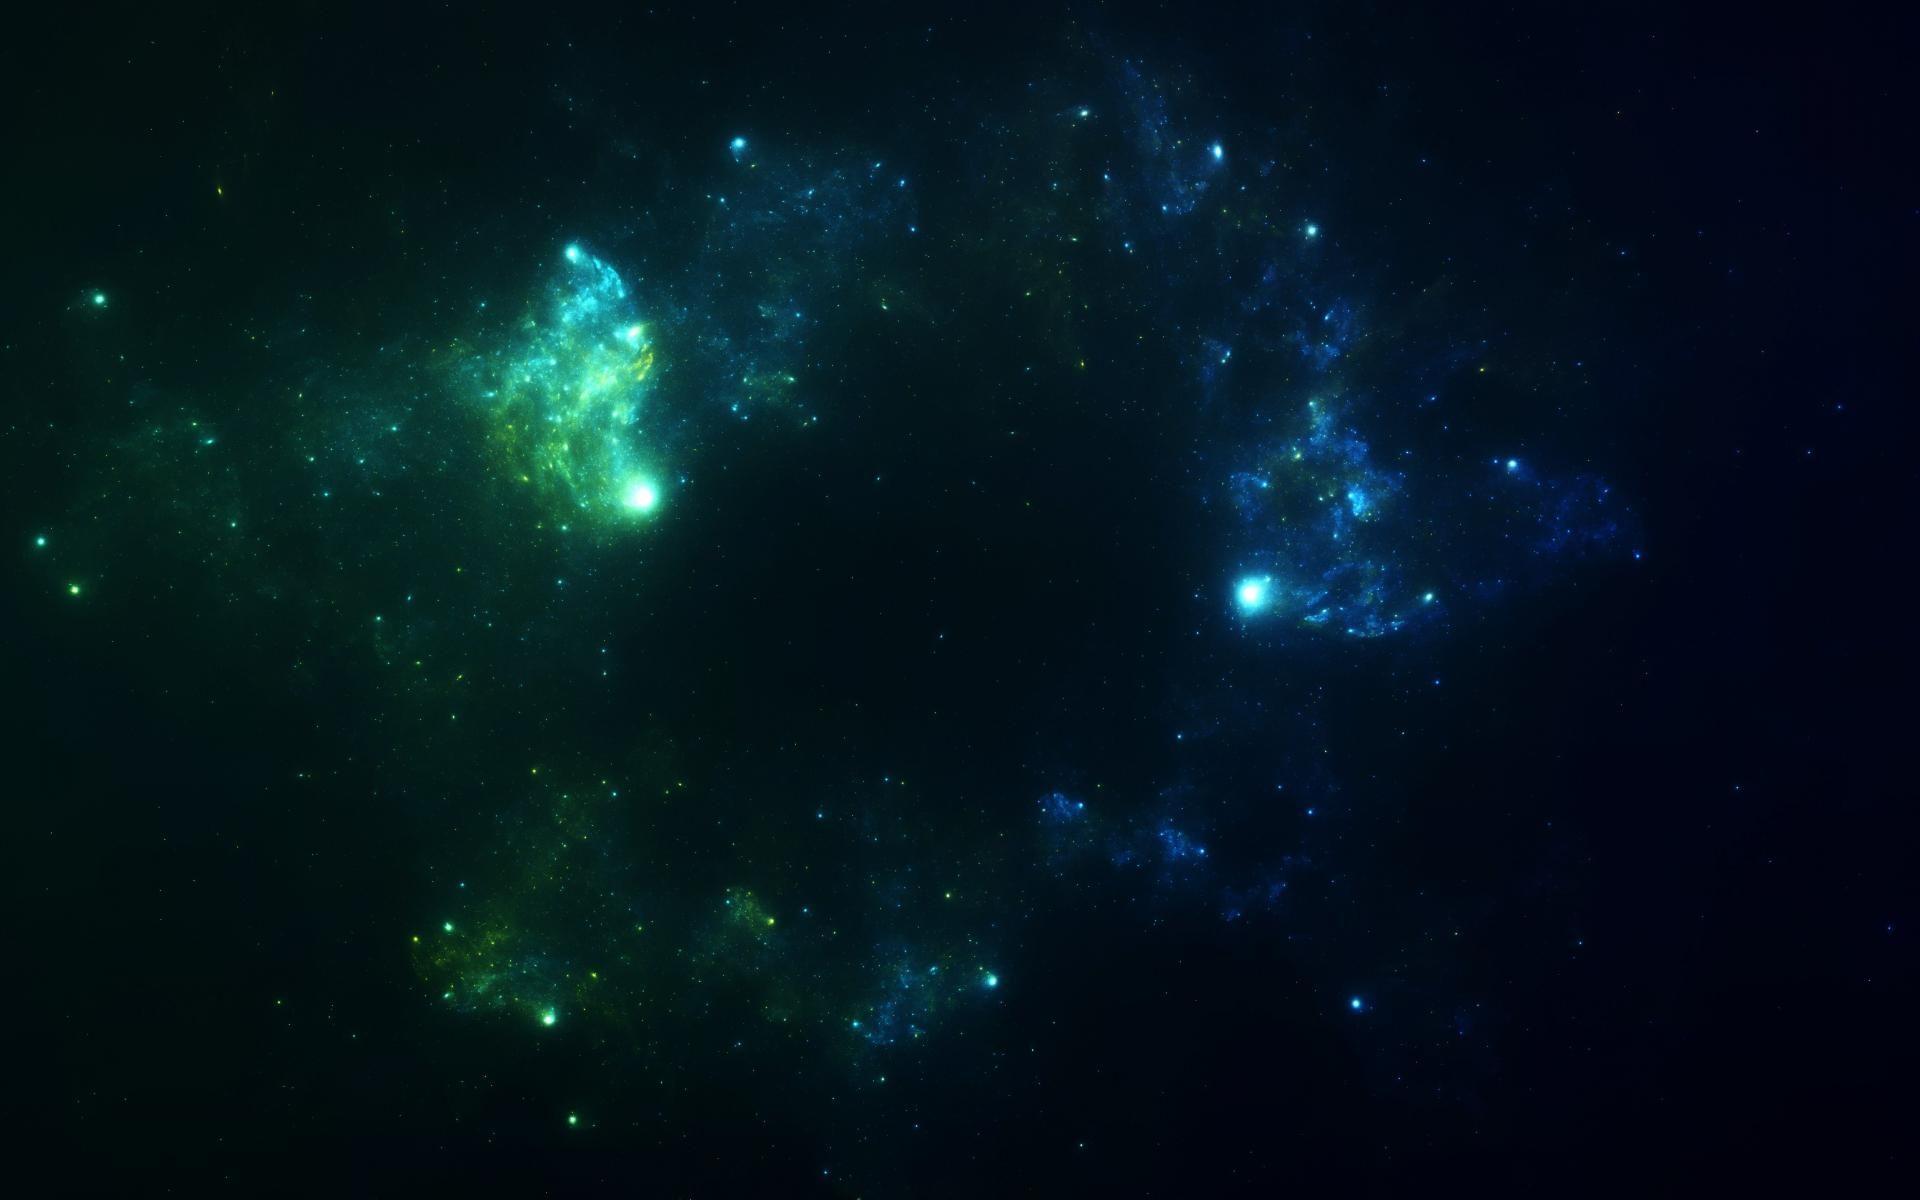 Green Galaxy Wallpapers - Top Free Green Galaxy Backgrounds